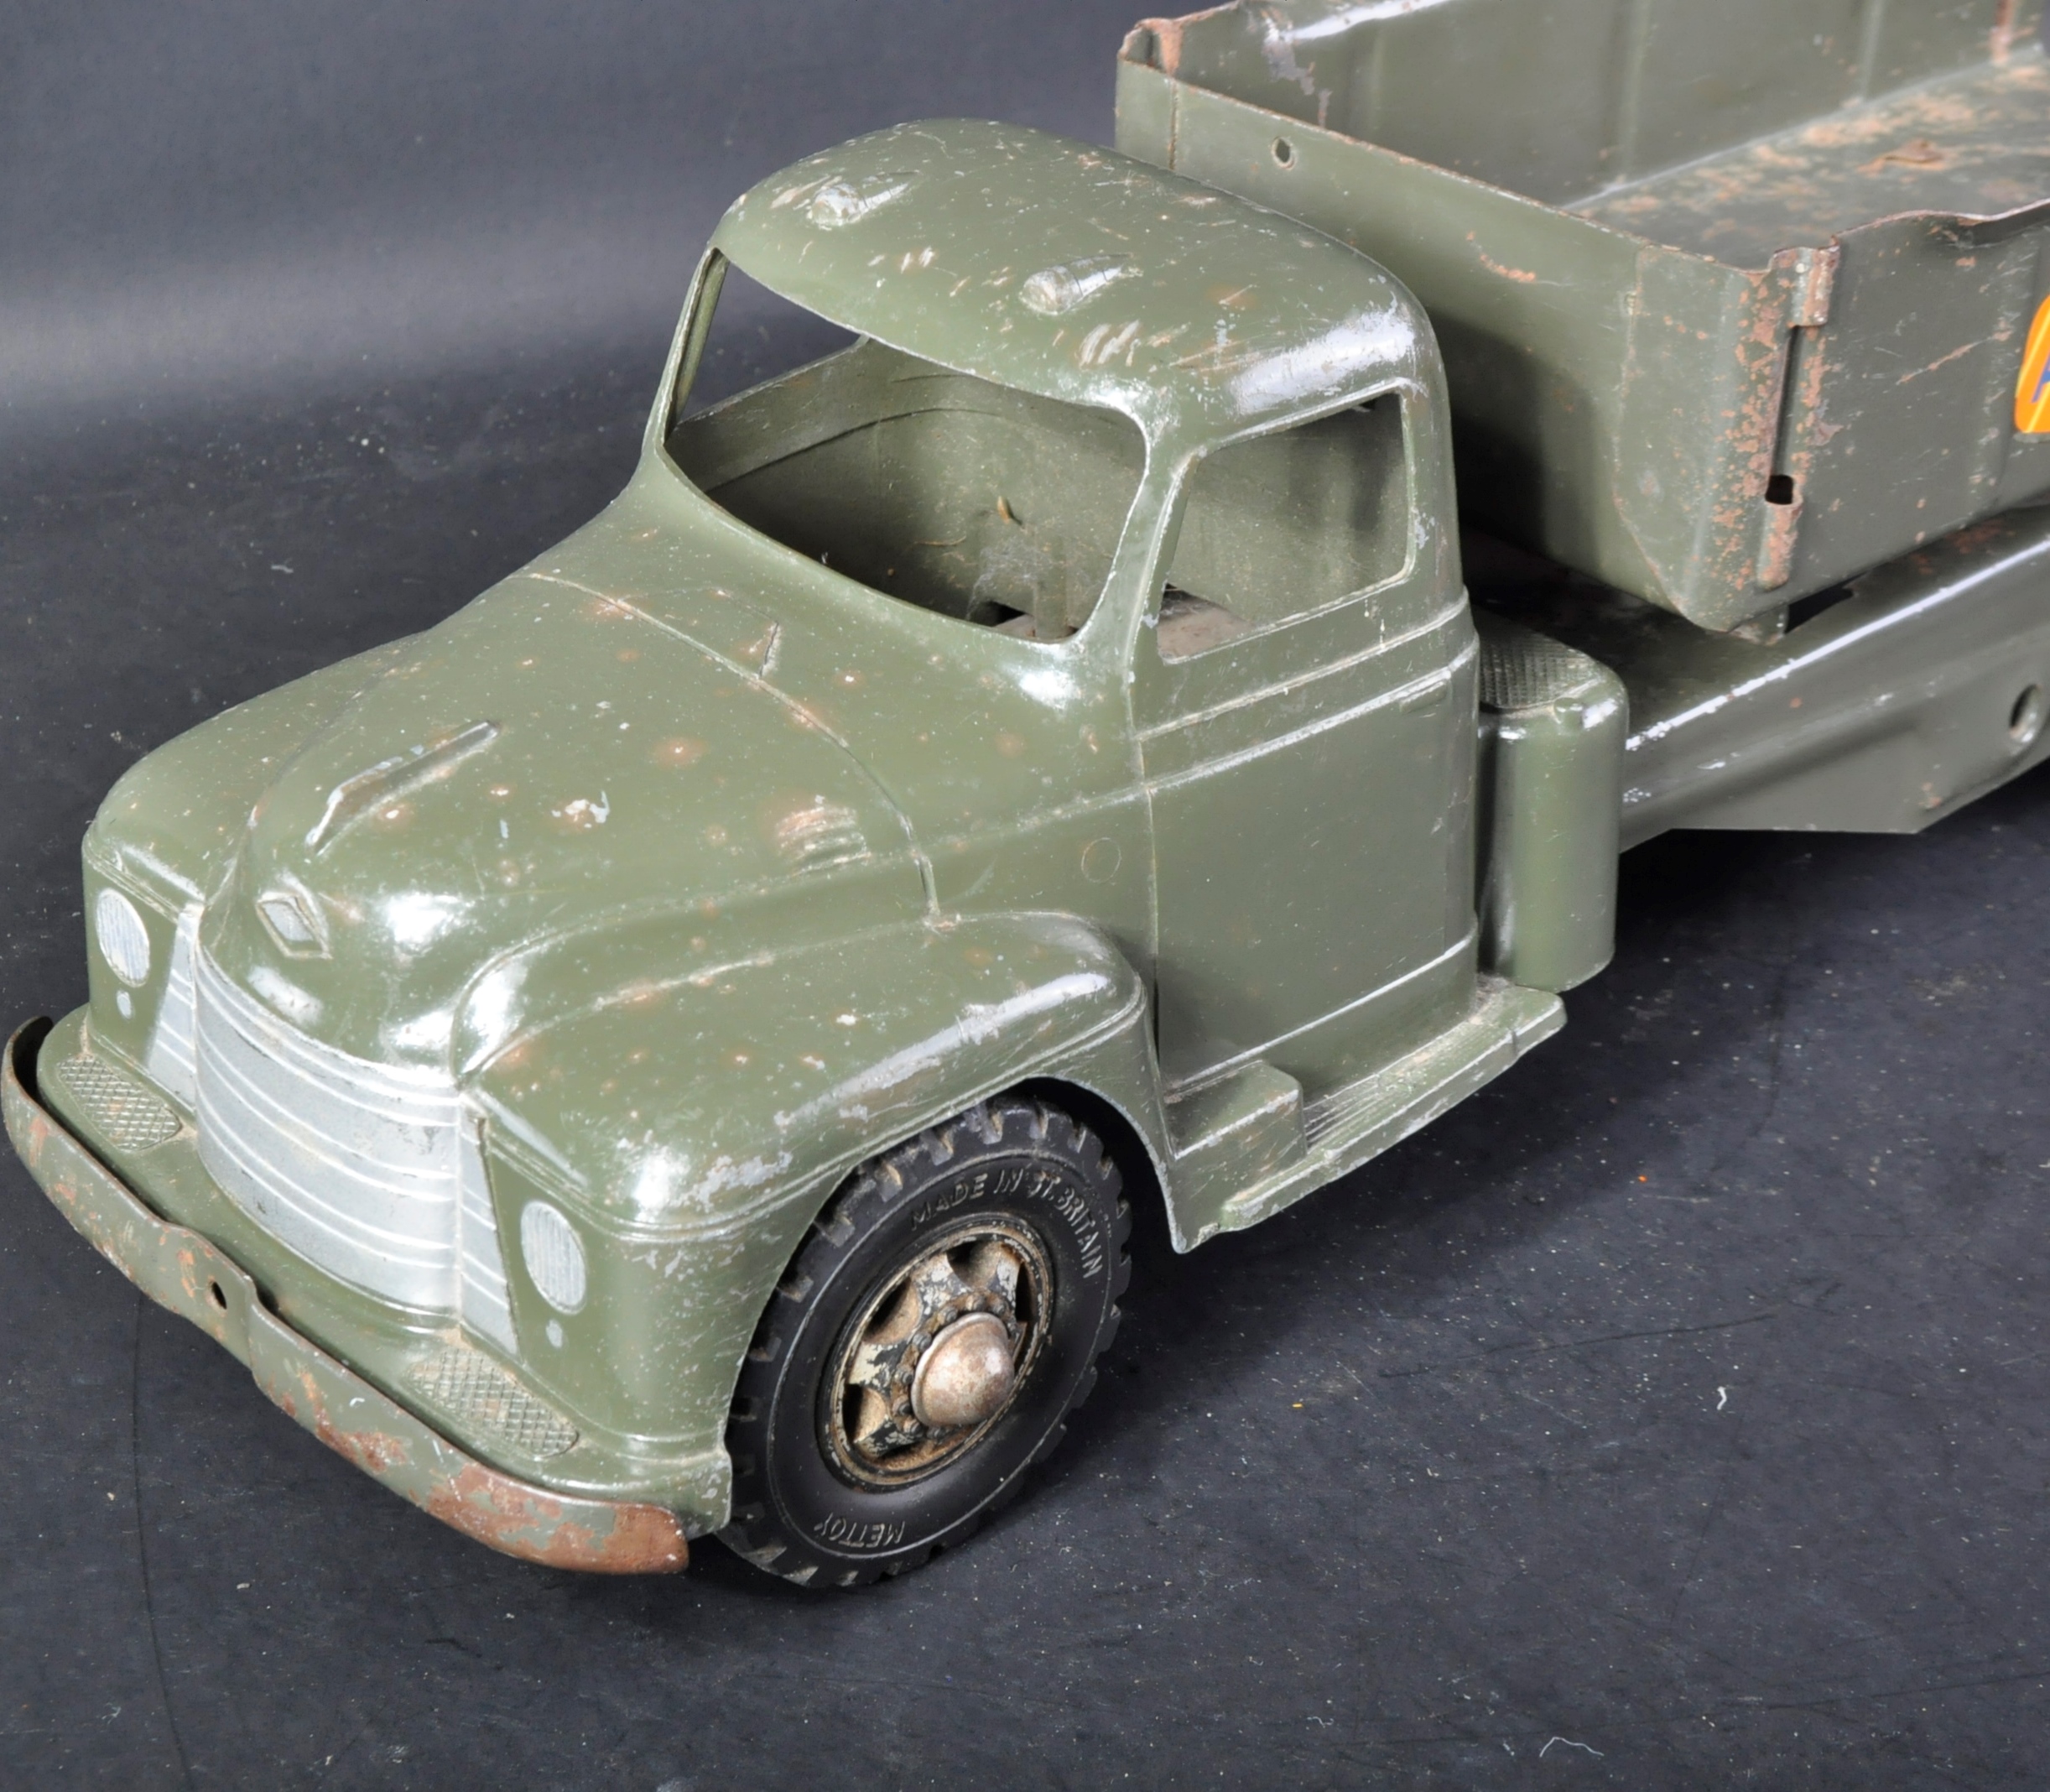 VINTAGE ' BUDDY L ' AMERICAN ARMY TRANSPORT TRUCK - Image 4 of 6